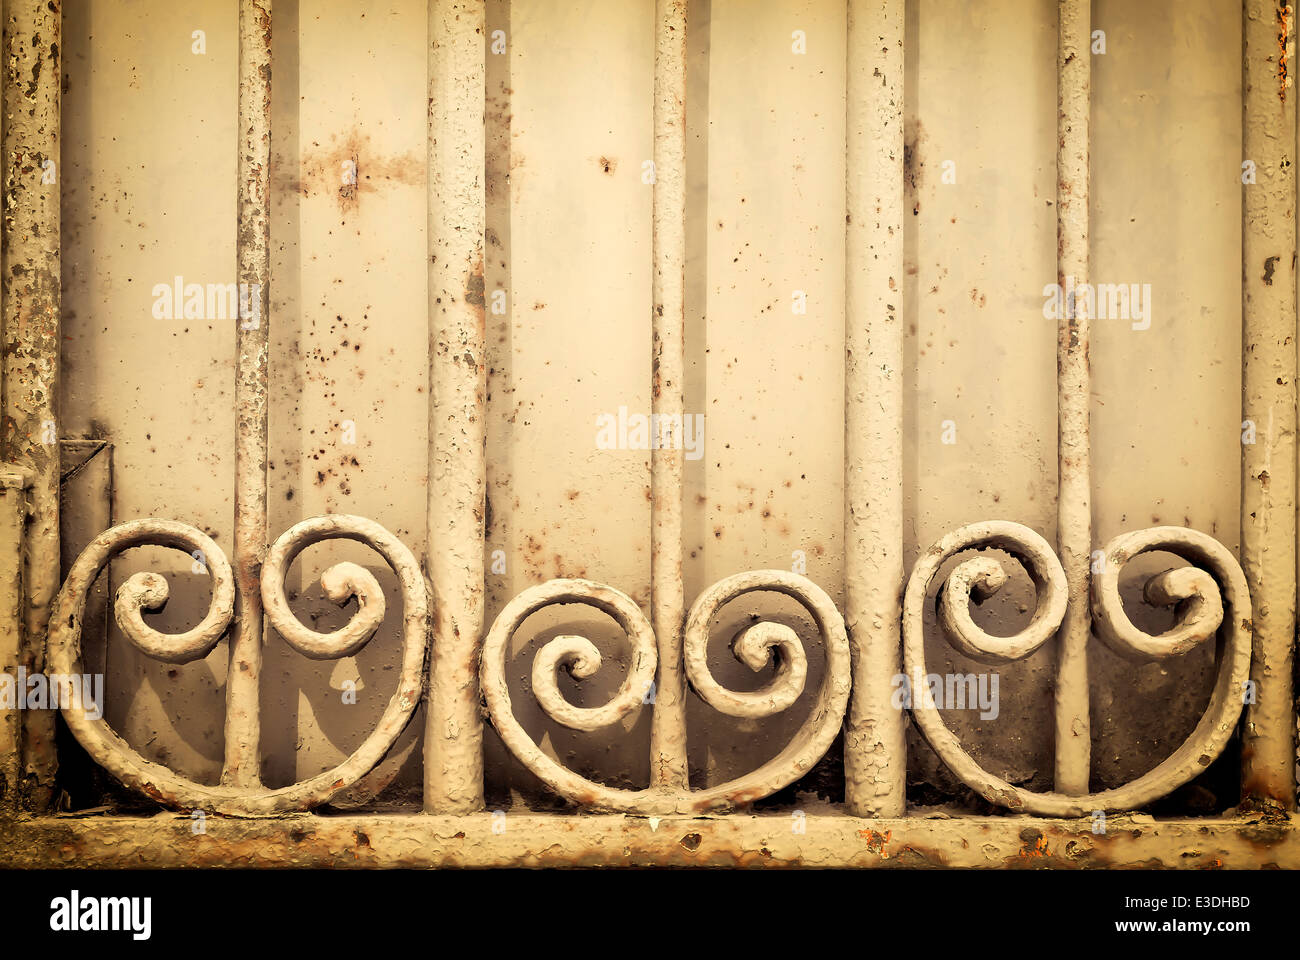 Old rusted metal decorative grate Stock Photo